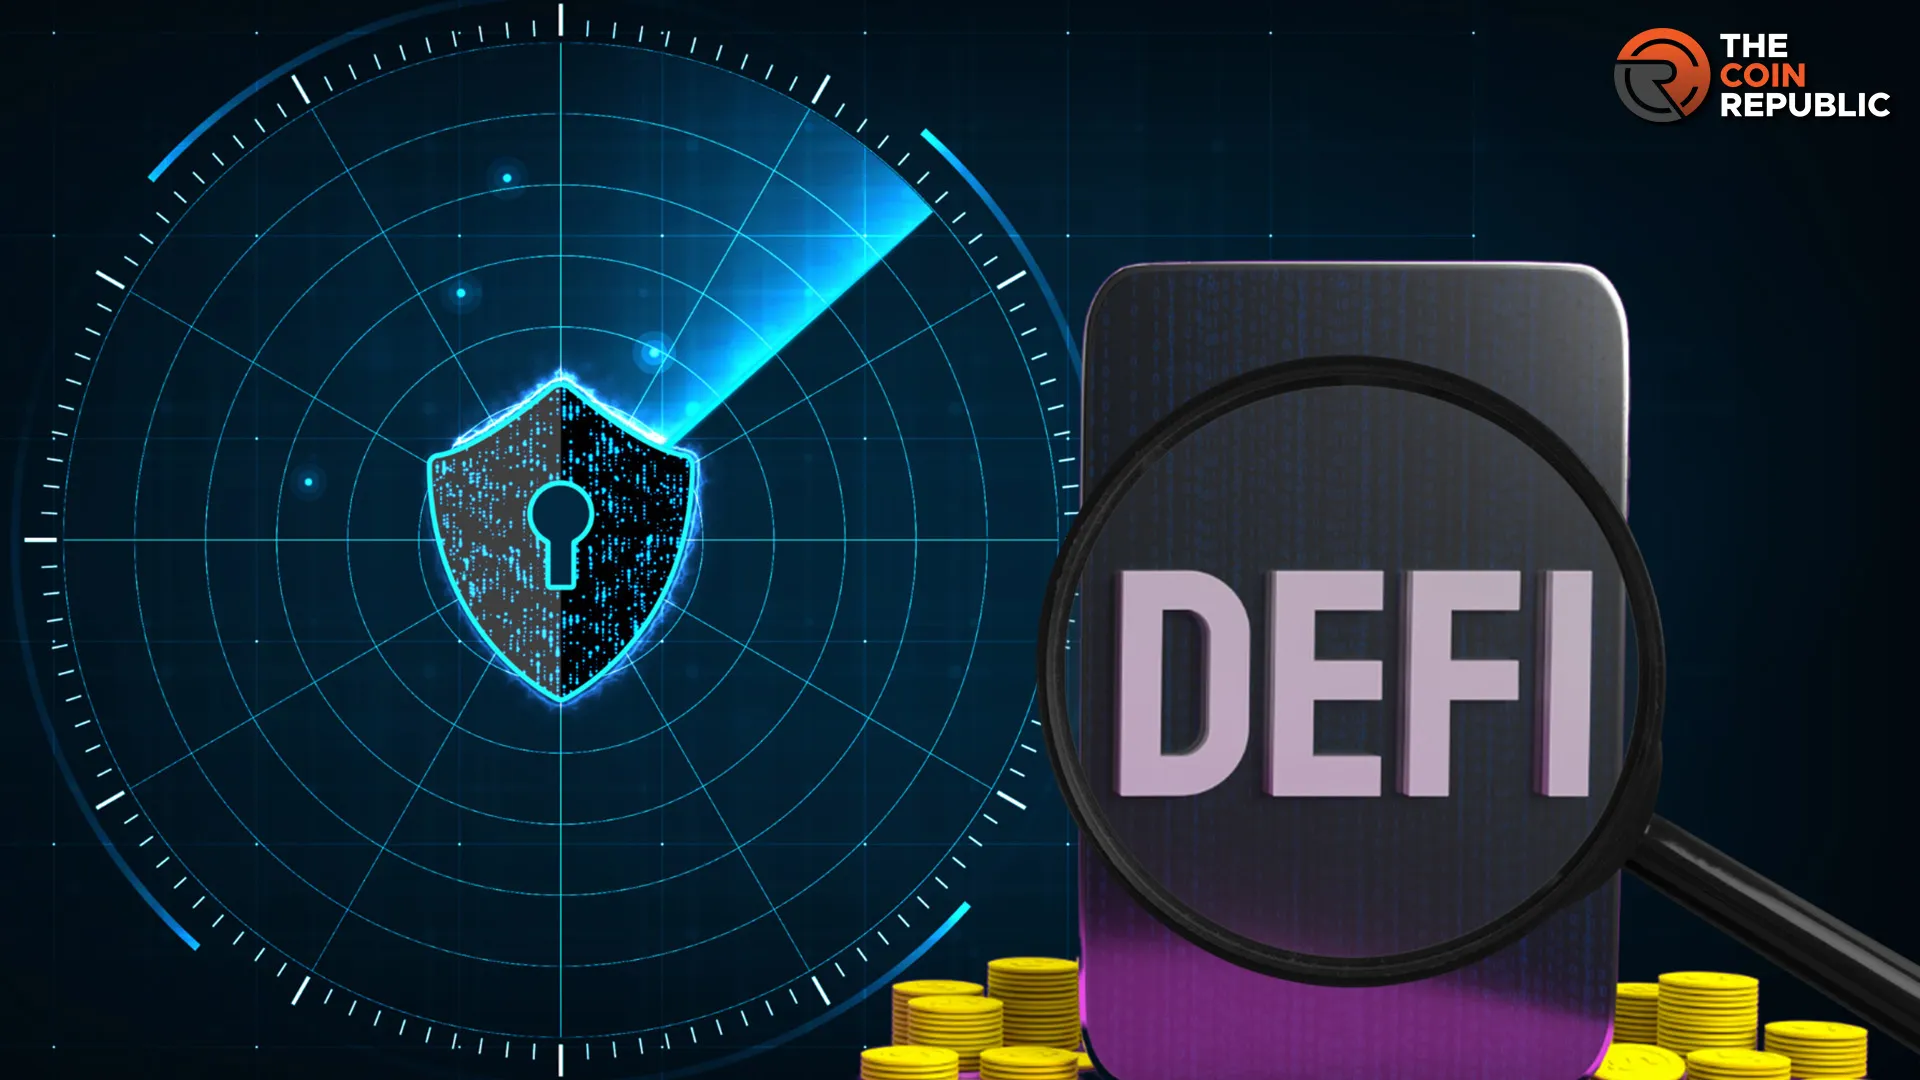 Why Could Your Favorite DeFi Platform Be the Next Target?